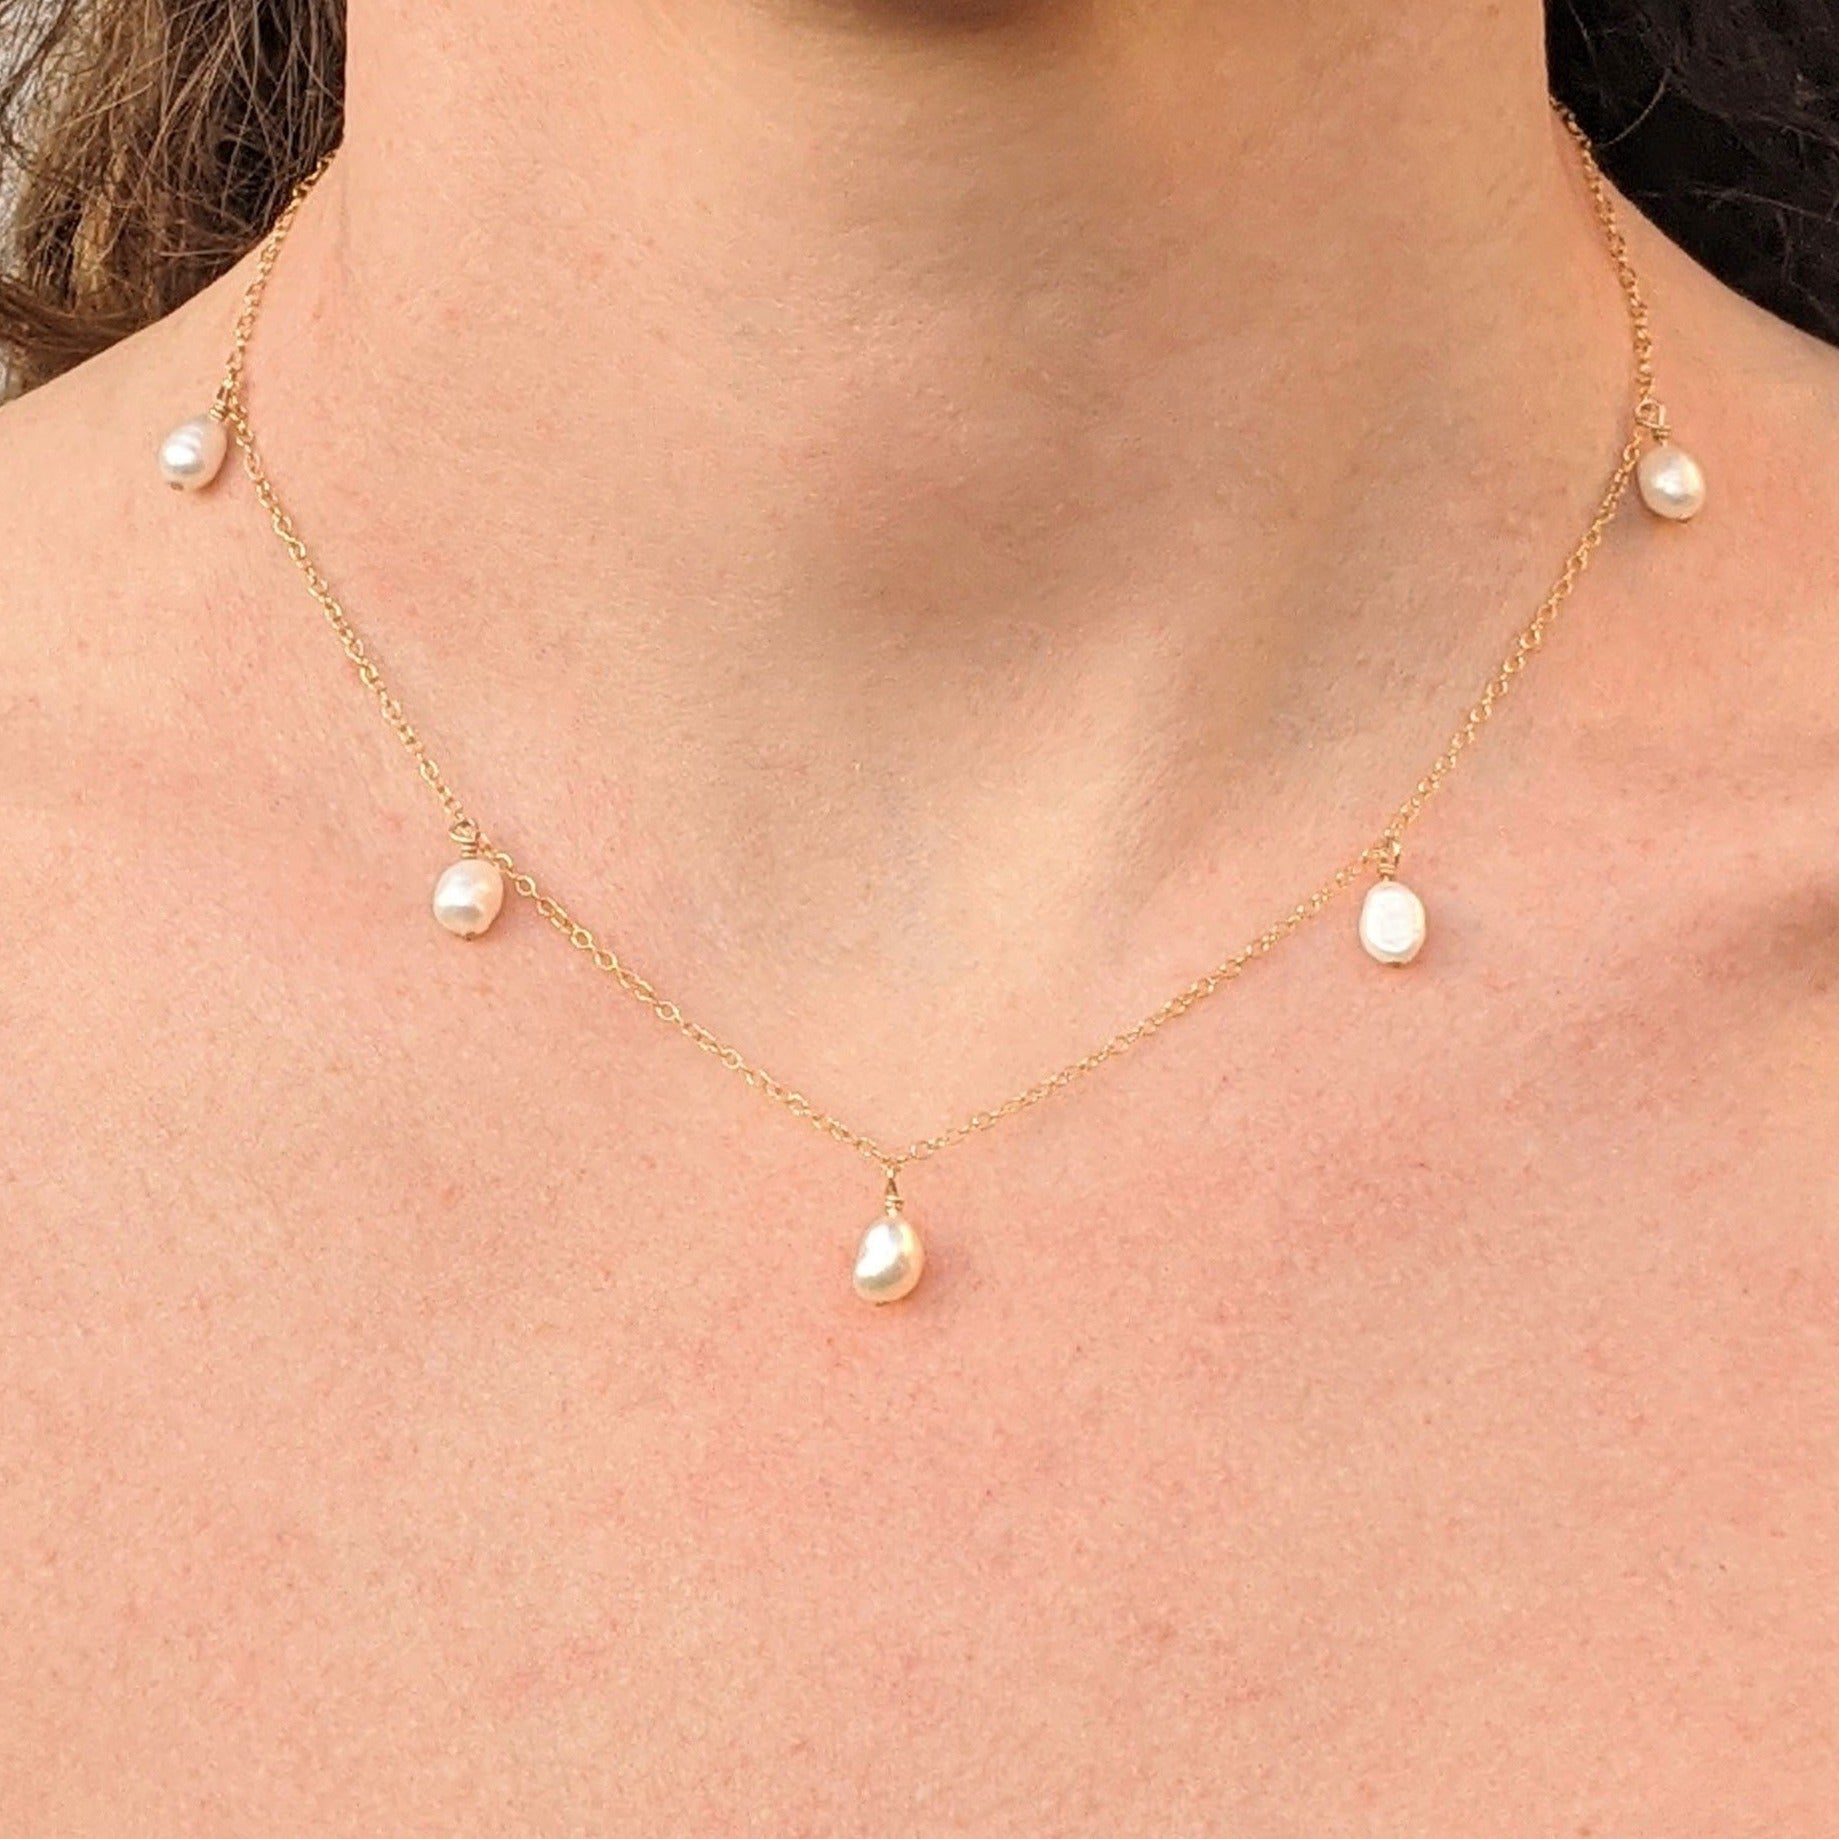 5 small baroque pearl necklace Annalise model closeup